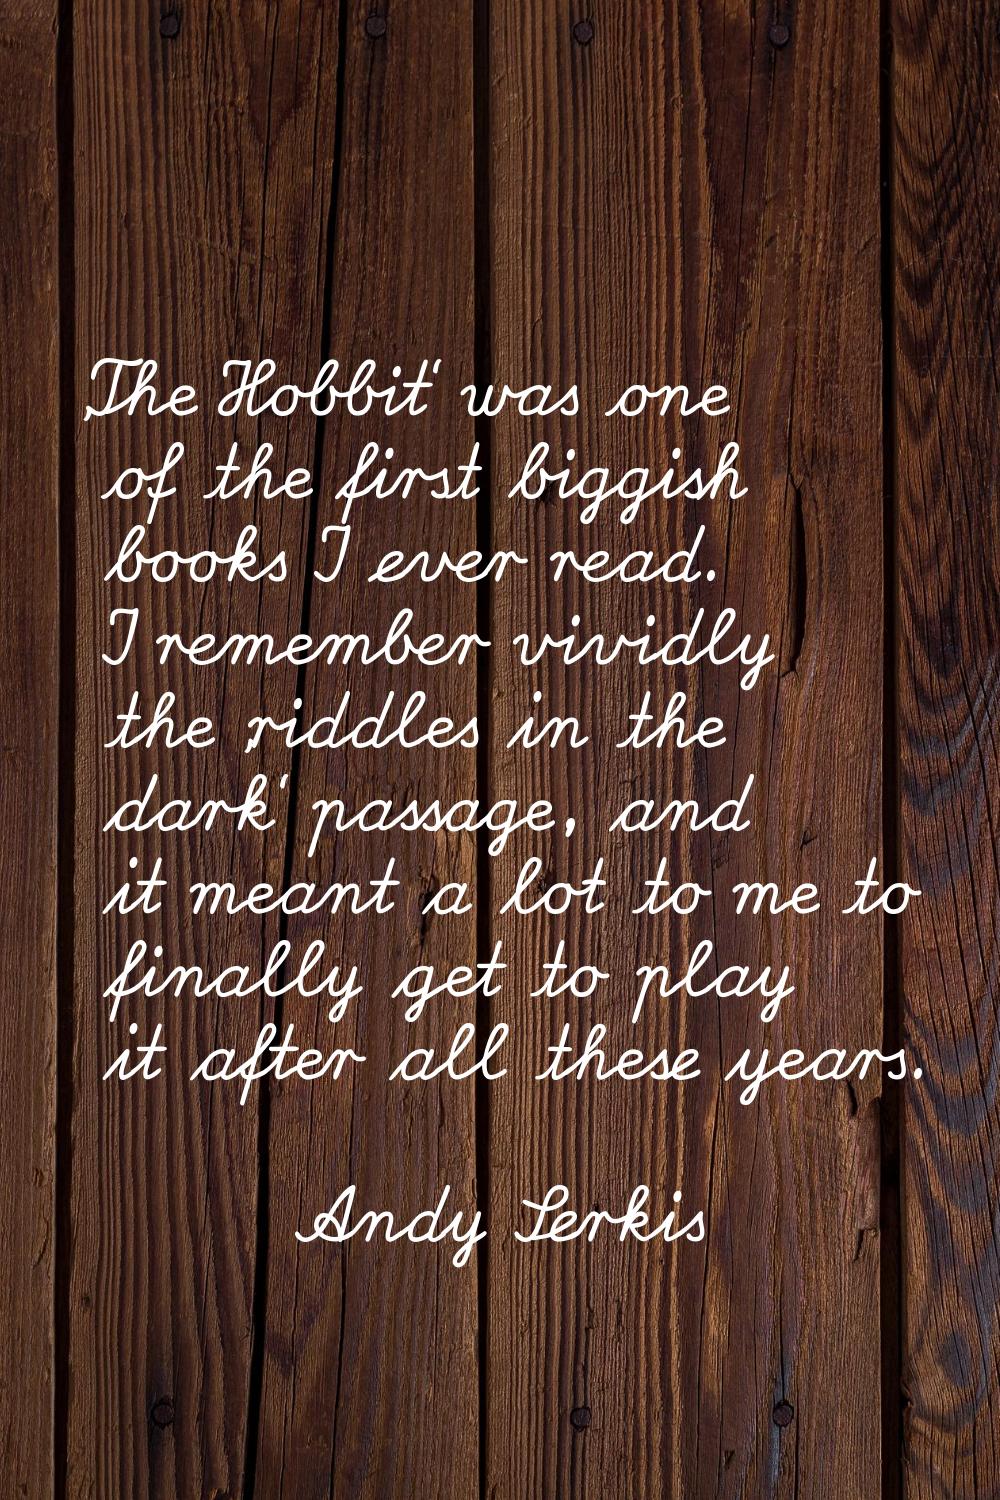 'The Hobbit' was one of the first biggish books I ever read. I remember vividly the 'riddles in the